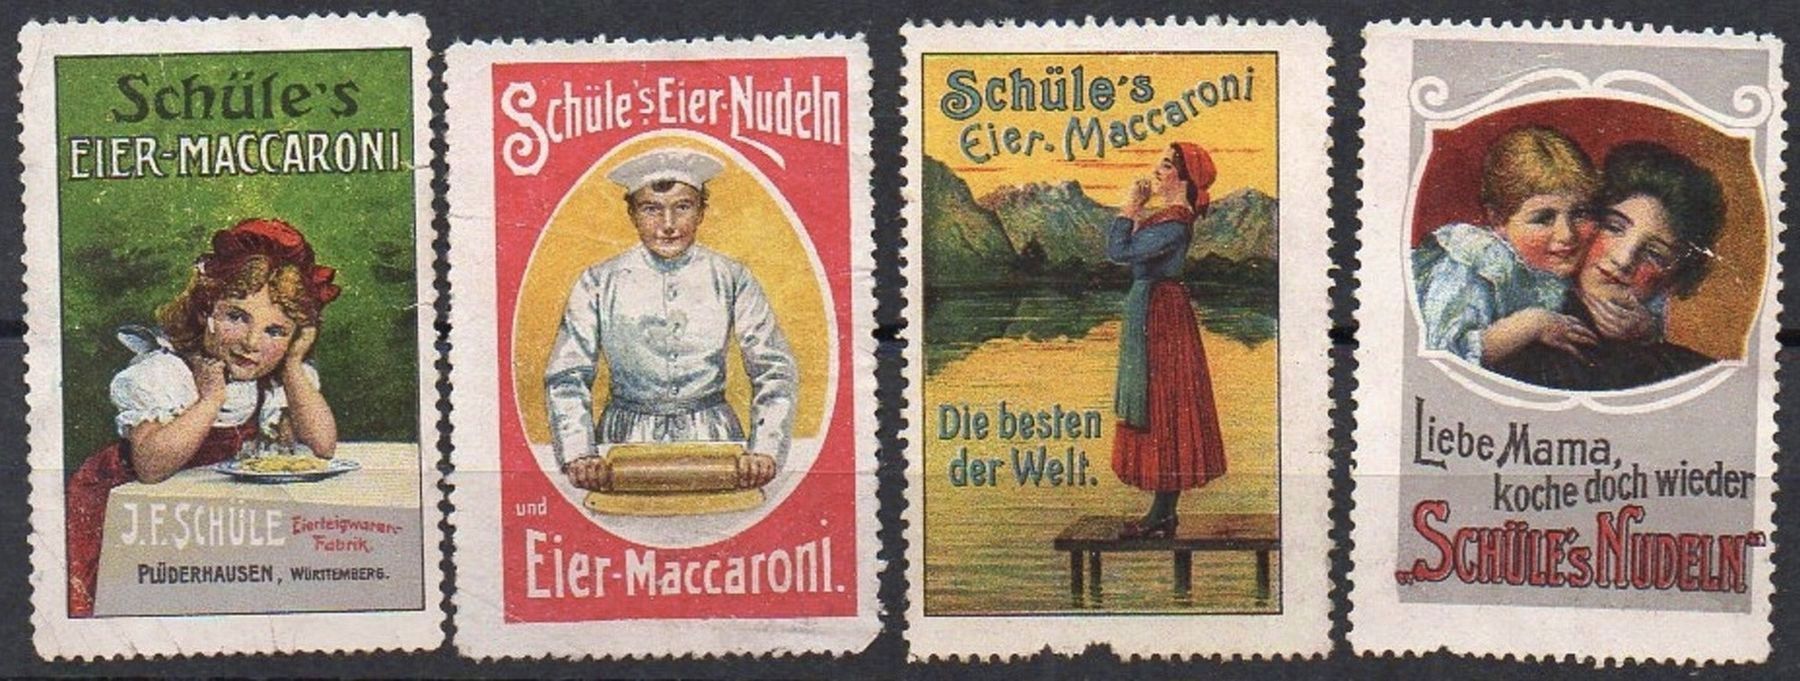 Advertising Stamps for the Egg Pasta made in J.F. Schle's factory - the Knigsbau image. Click for full size.